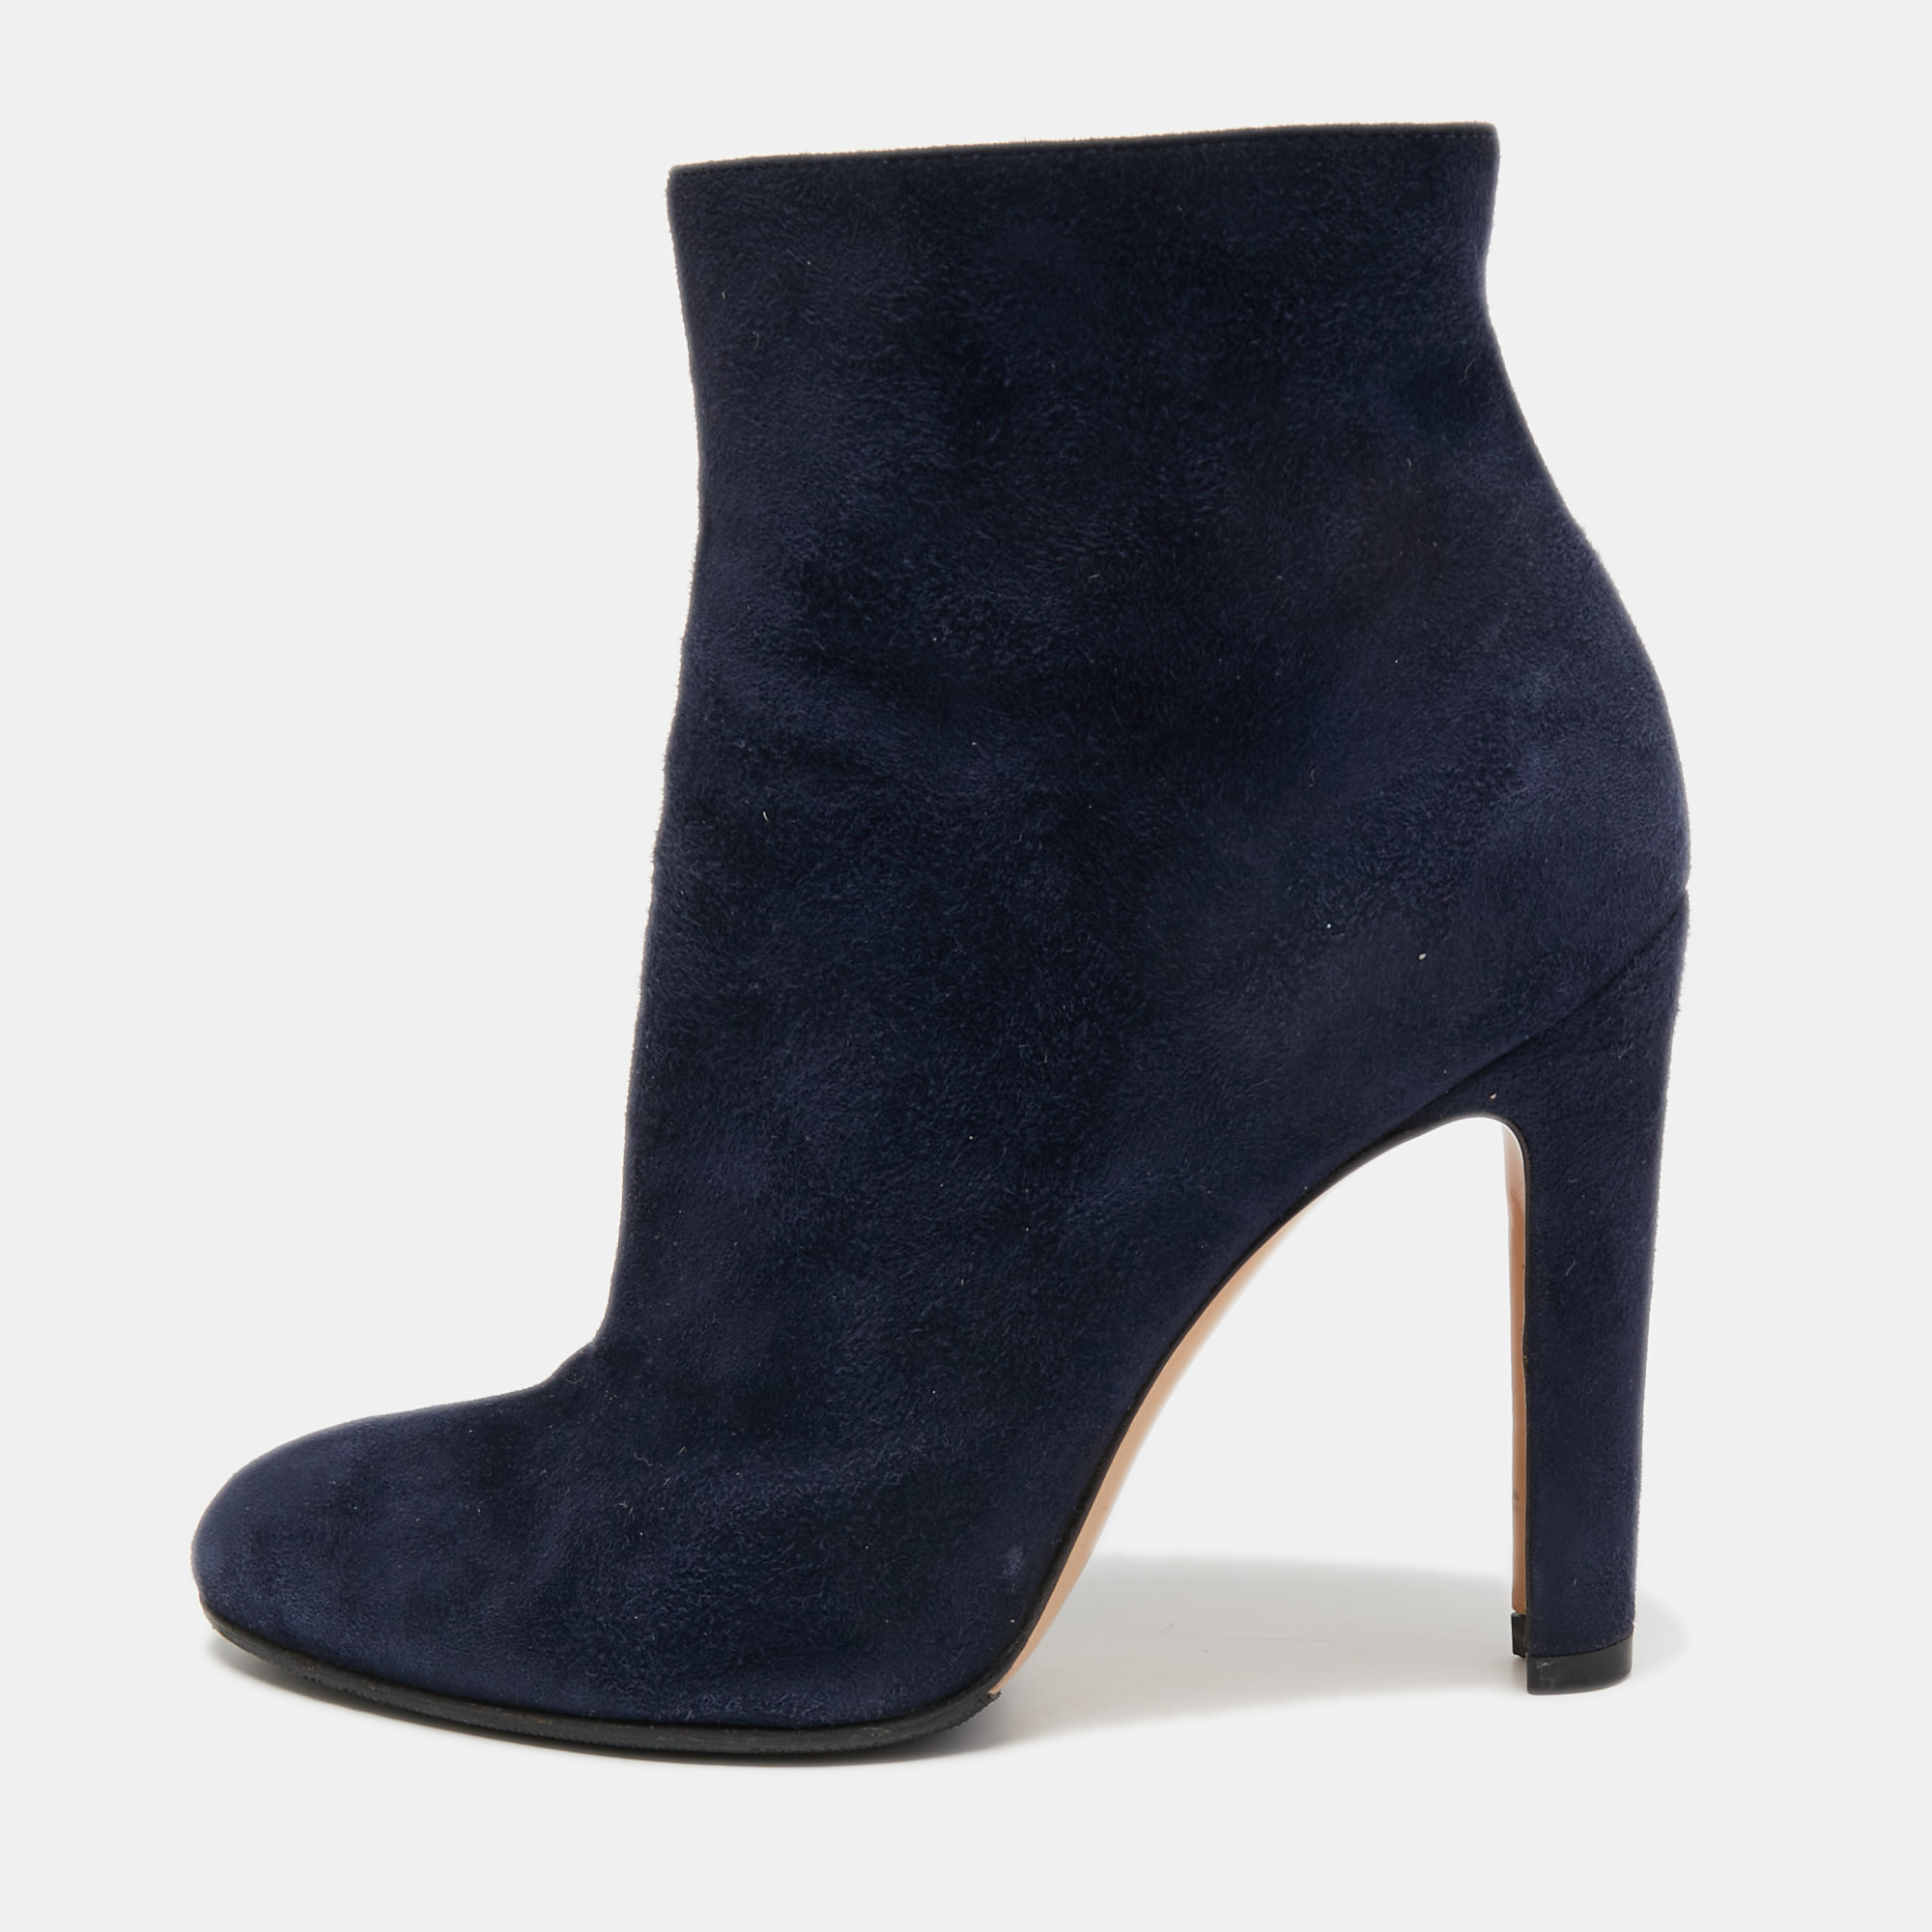 Pre-owned Gianvito Rossi Navy Blue Suede Ankle Booties Size 37